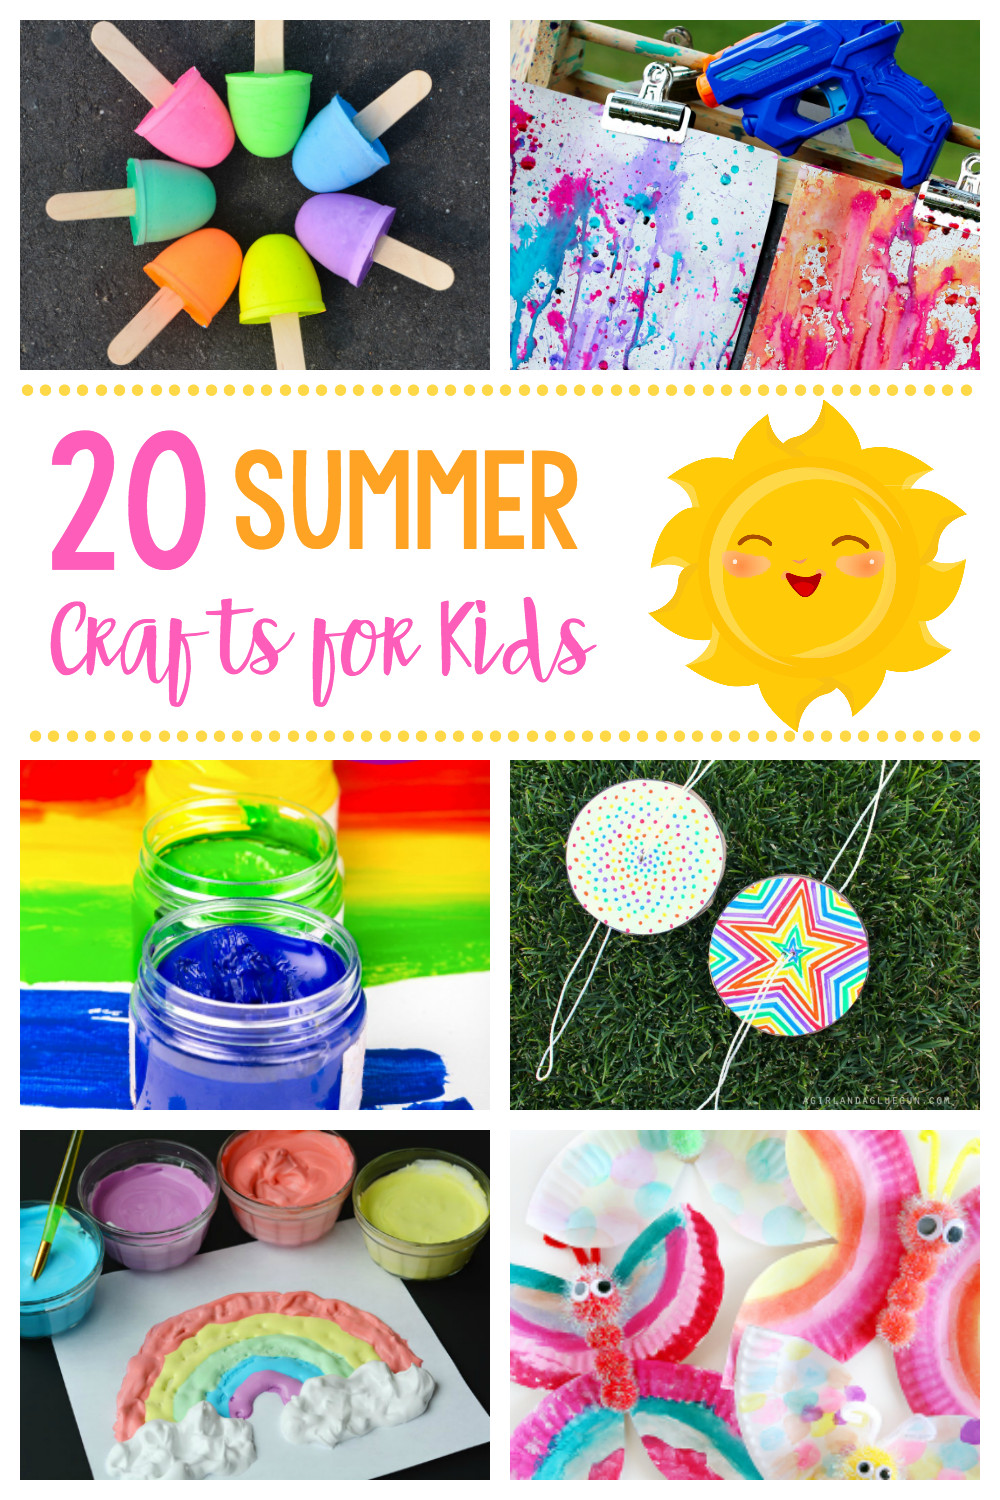 Free Craft Ideas For Kids
 20 Simple & Fun Summer Crafts for Kids